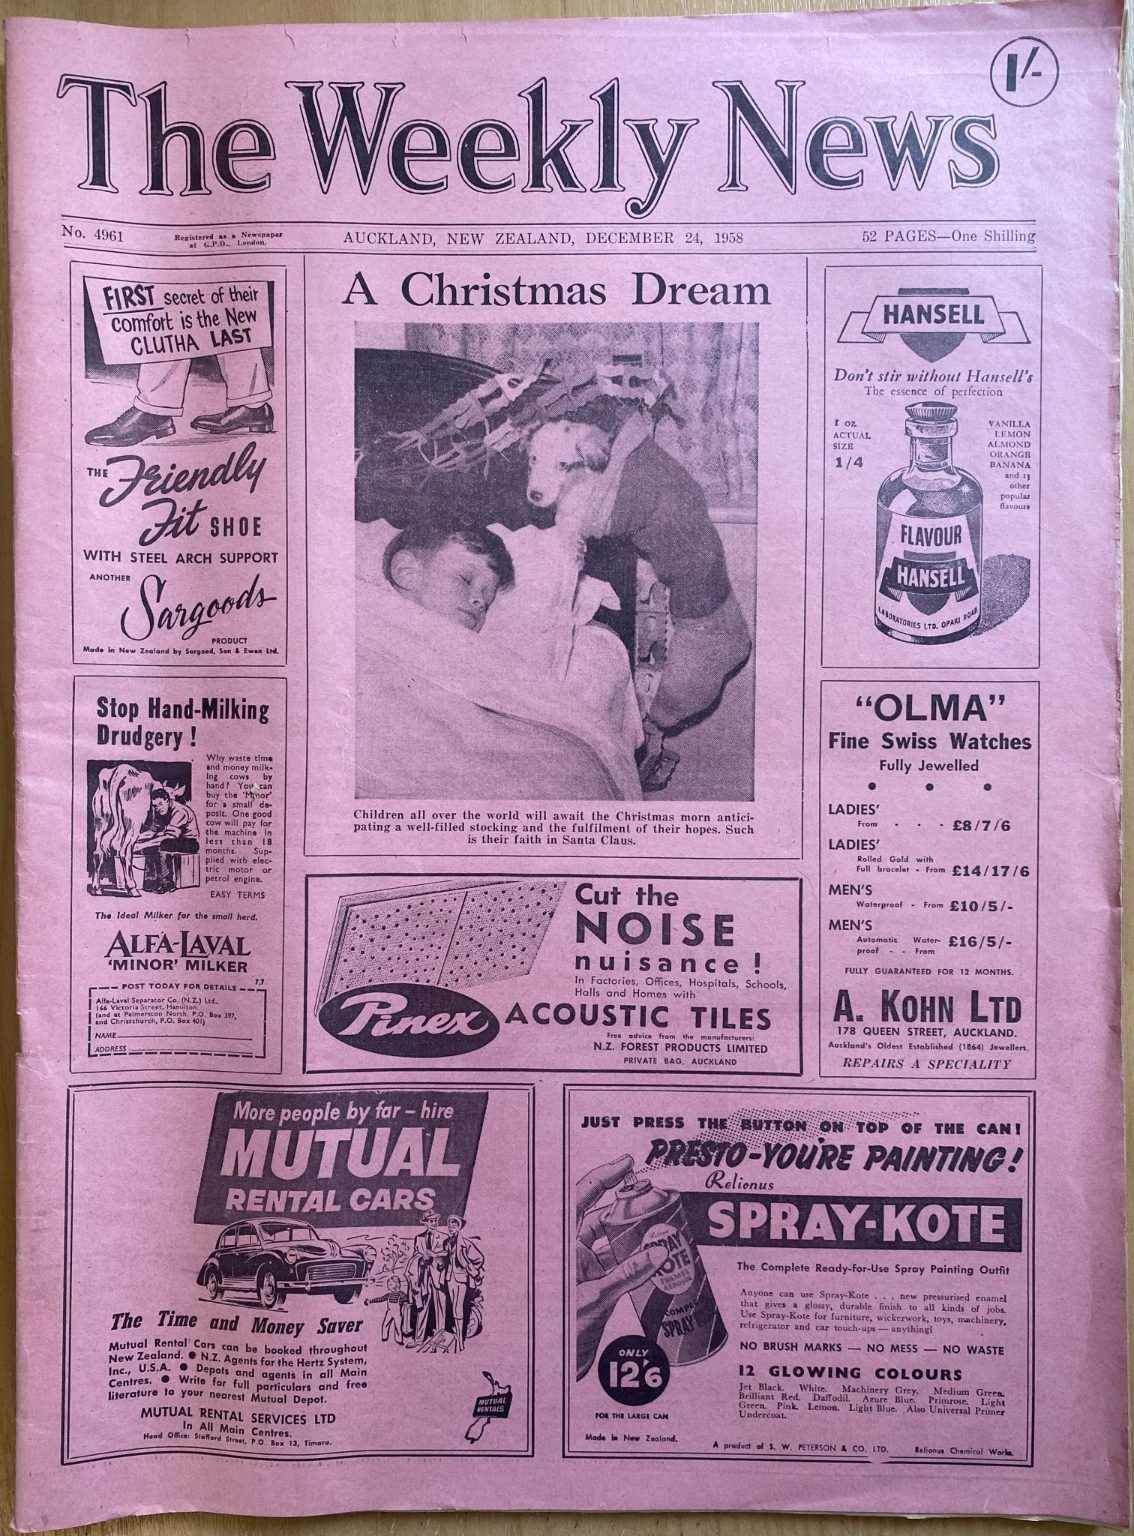 OLD NEWSPAPER: The Weekly News, No. 4961, 24 December 1958